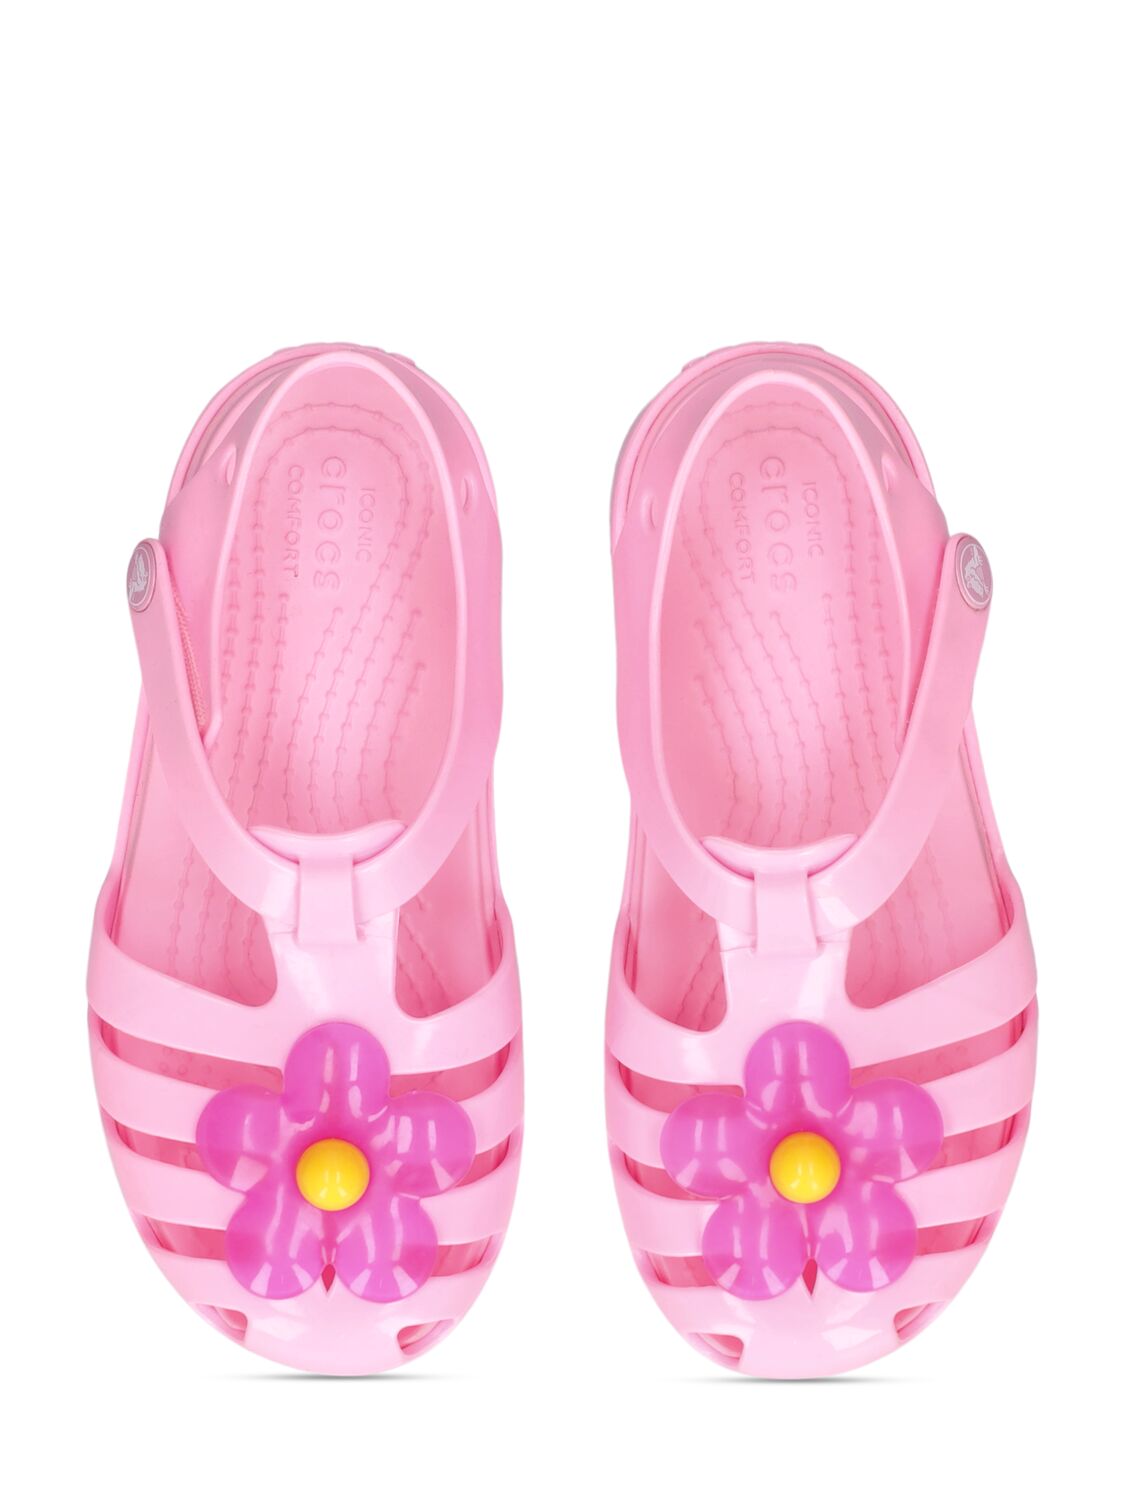 Shop Crocs Isabella Rubber Sandals W/ Patch In Pink